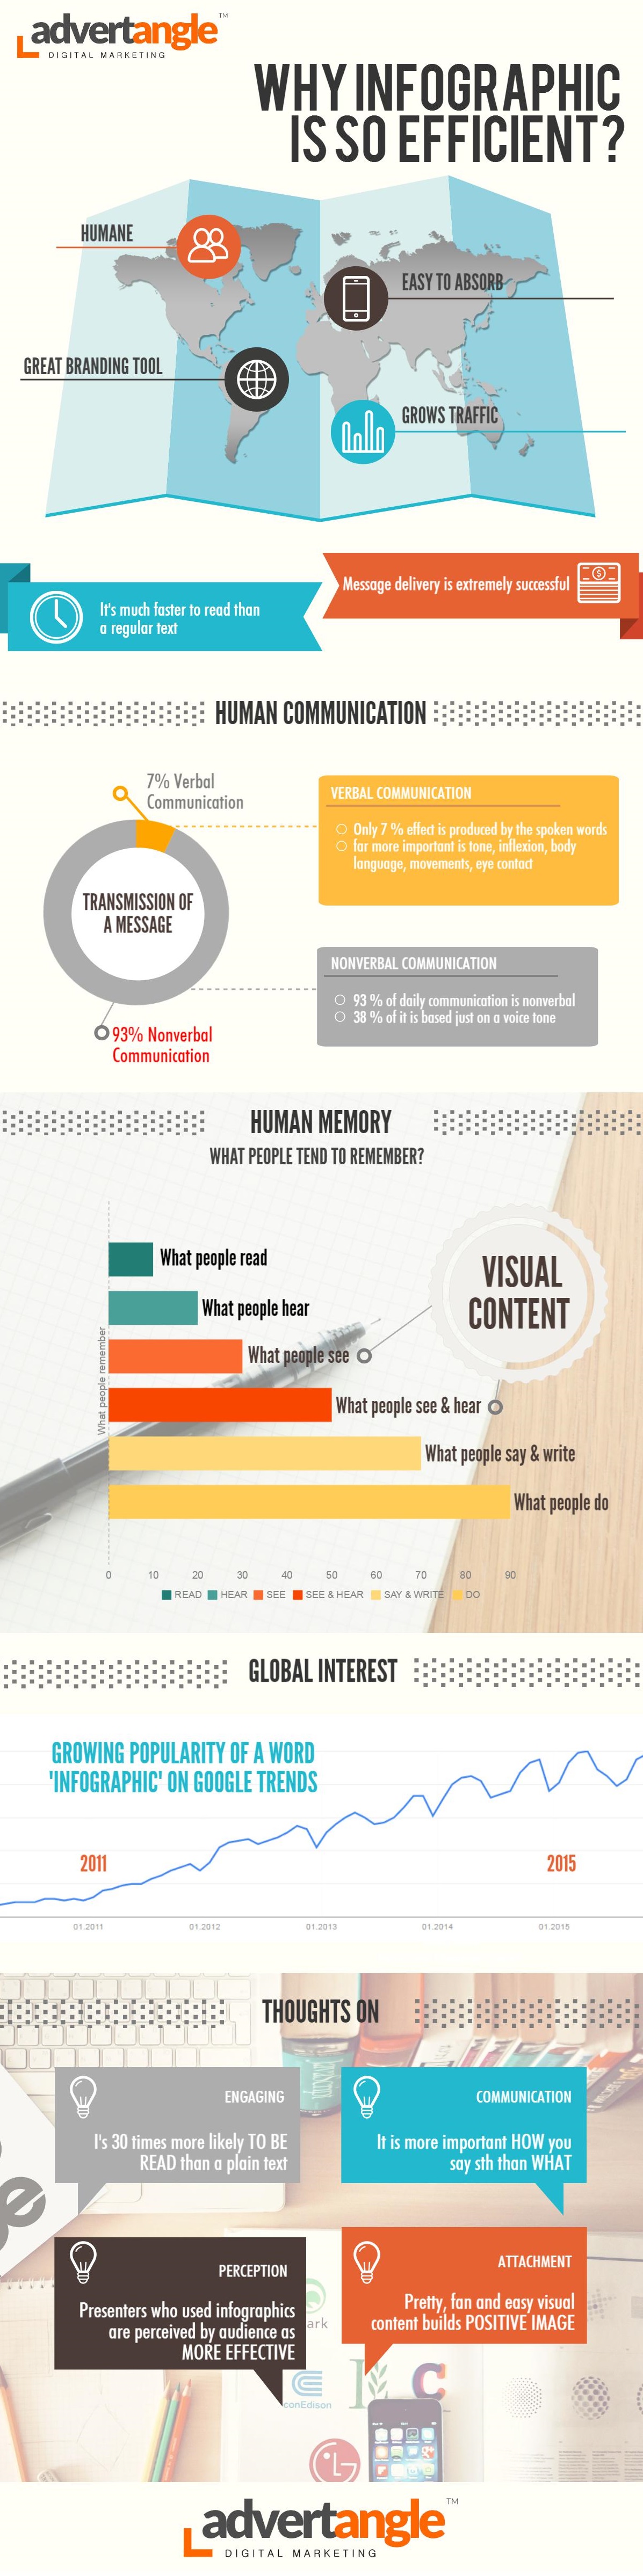 5 Steps To Create Infographic In Piktochart Advertangle